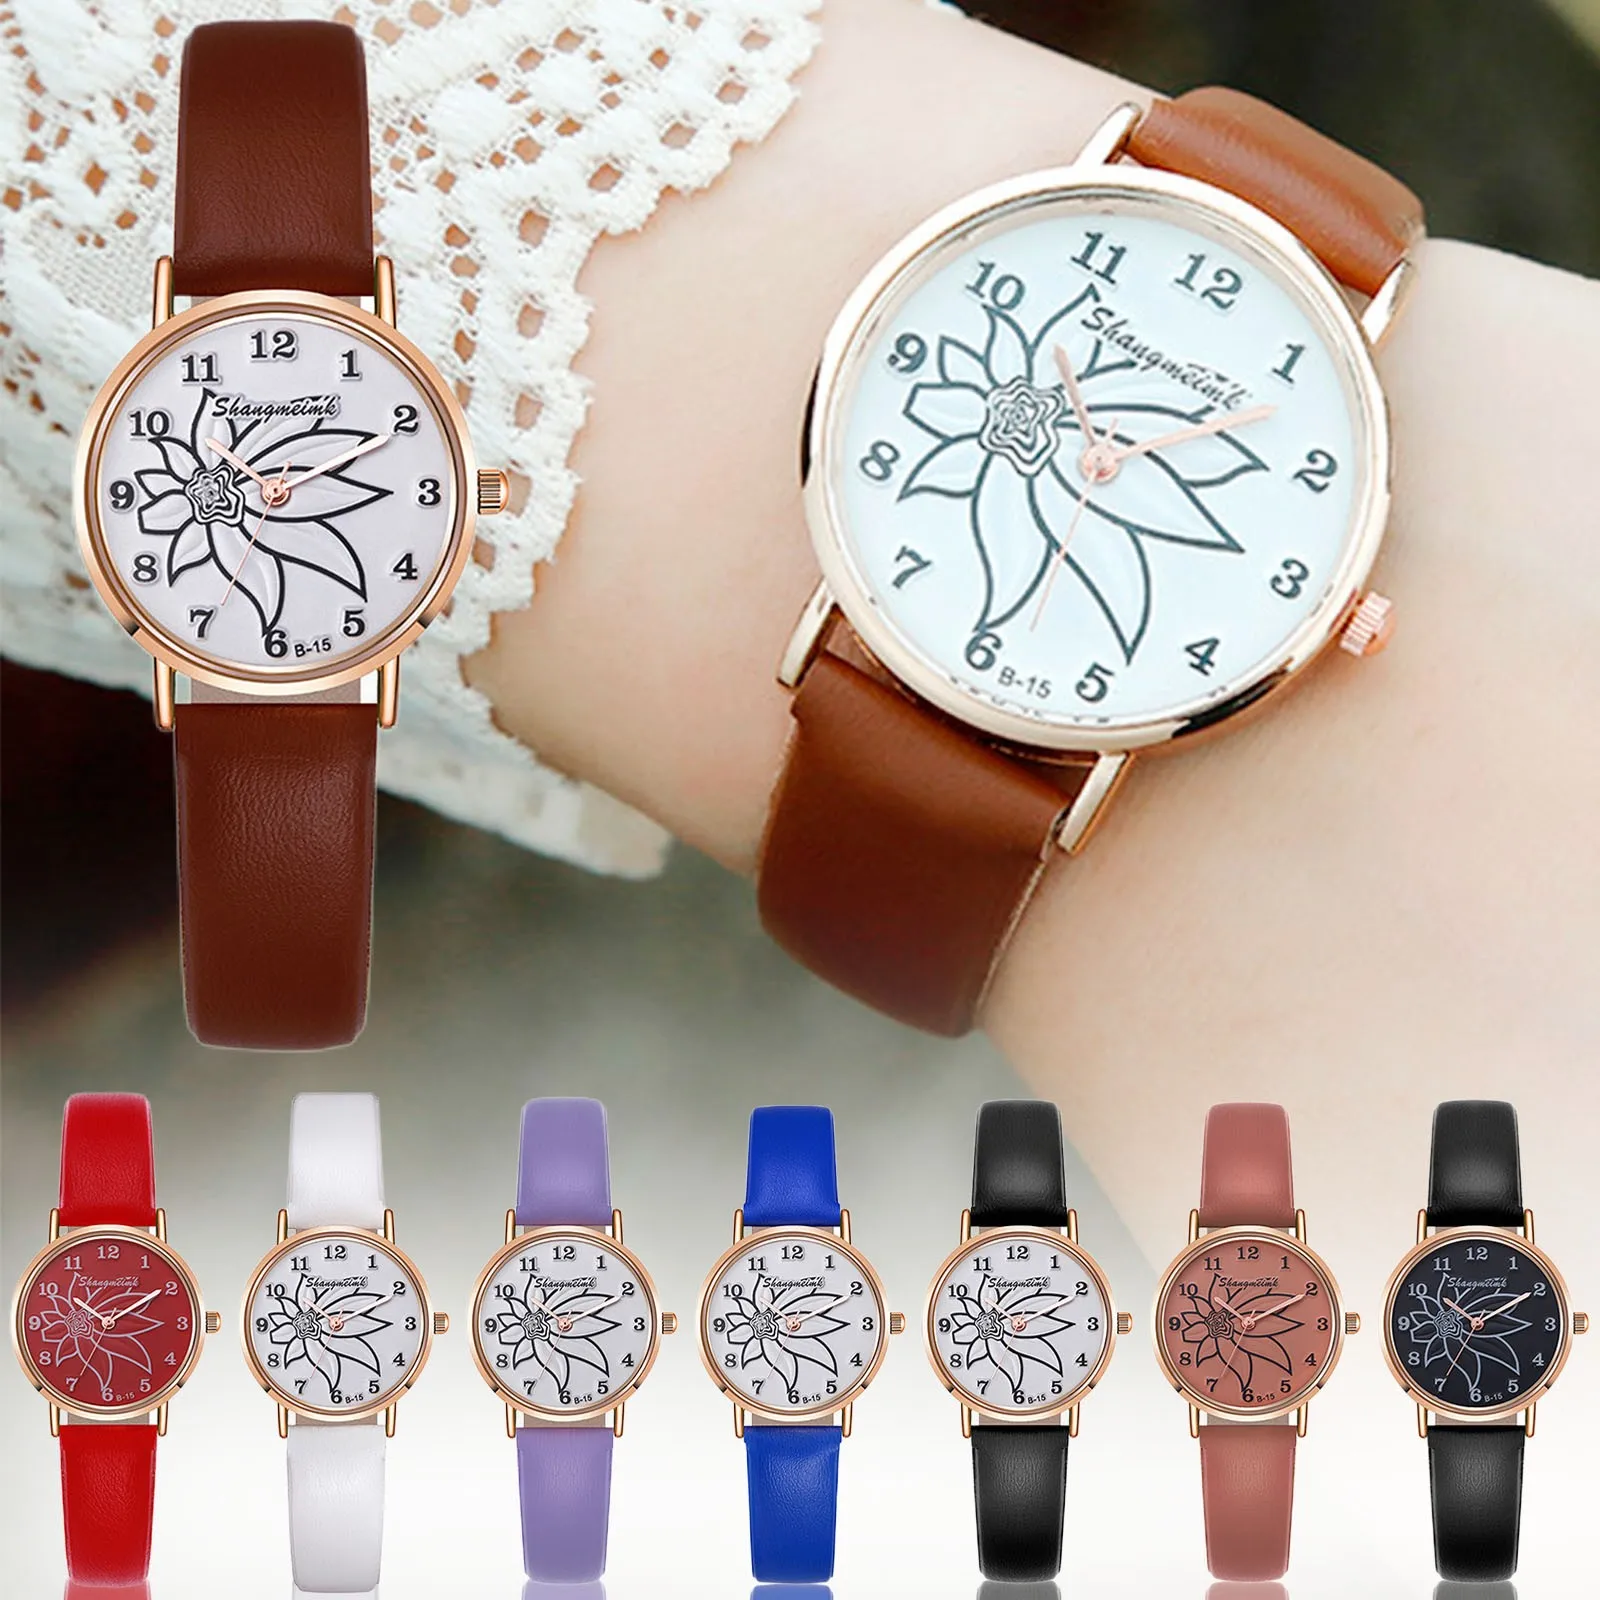 

Women's Watch Digital Dial Quartz Wristwatches Leather Wristband Ladies Watch Gift Suitable For Women And Girls Montres Femmes